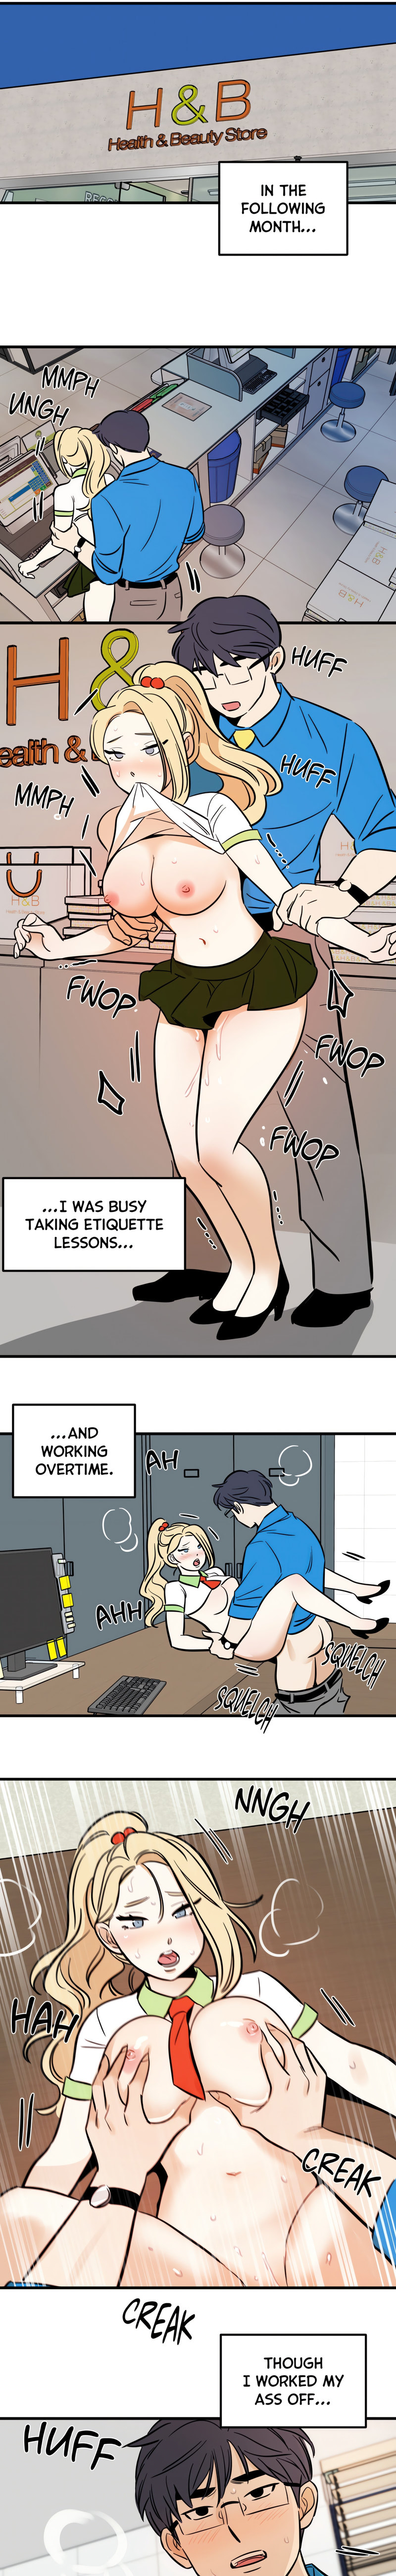 Naughty Positions - Chapter 8 Page 6